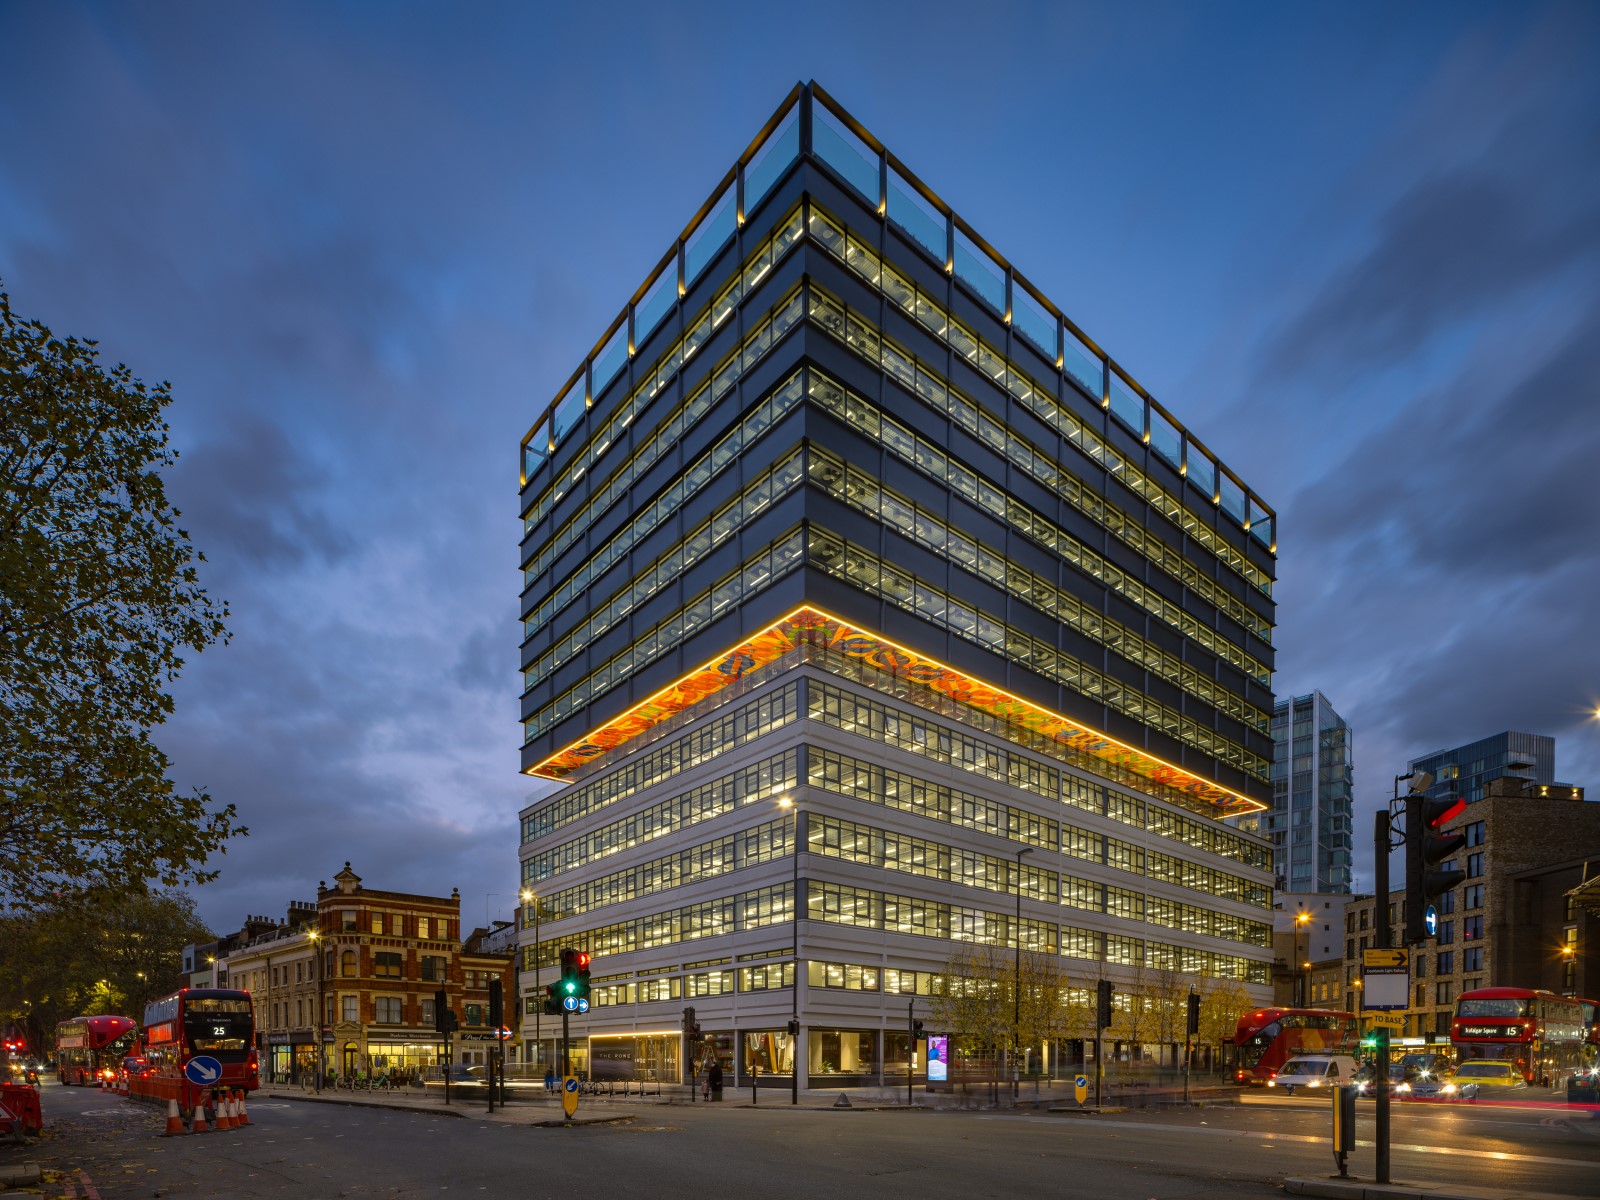 The Rowe, London runs on 100% renewable electricity and will see a carbon emission reduction of 45% compared to a standard office building.